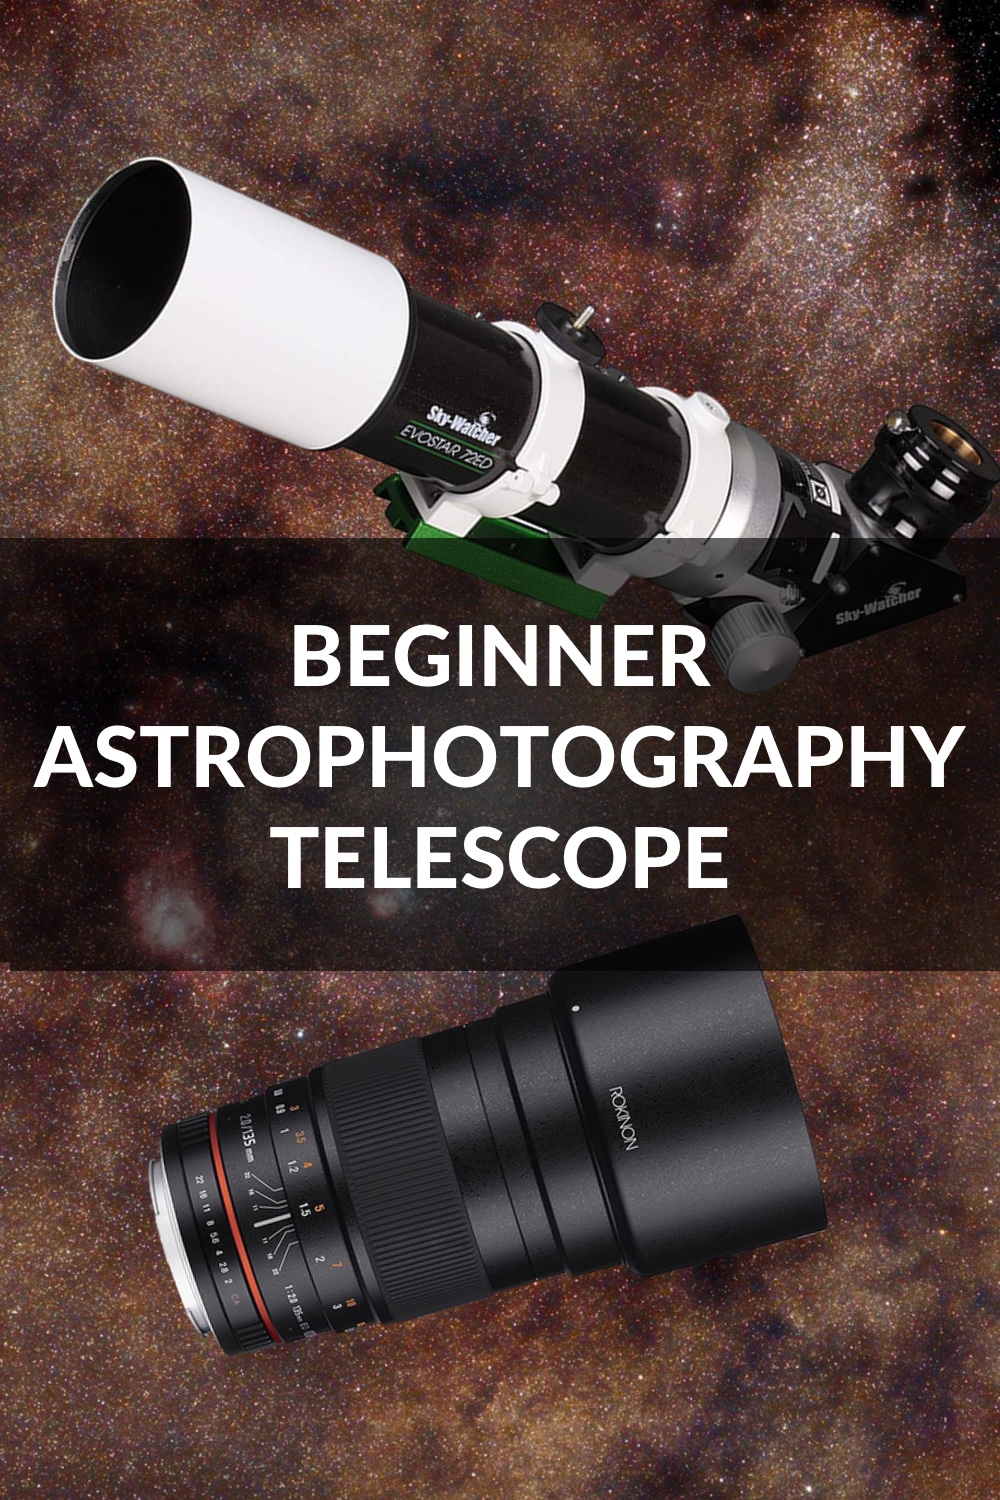 Beginner Astrophotography Telescope - How to Choose and Best Picks for 2020